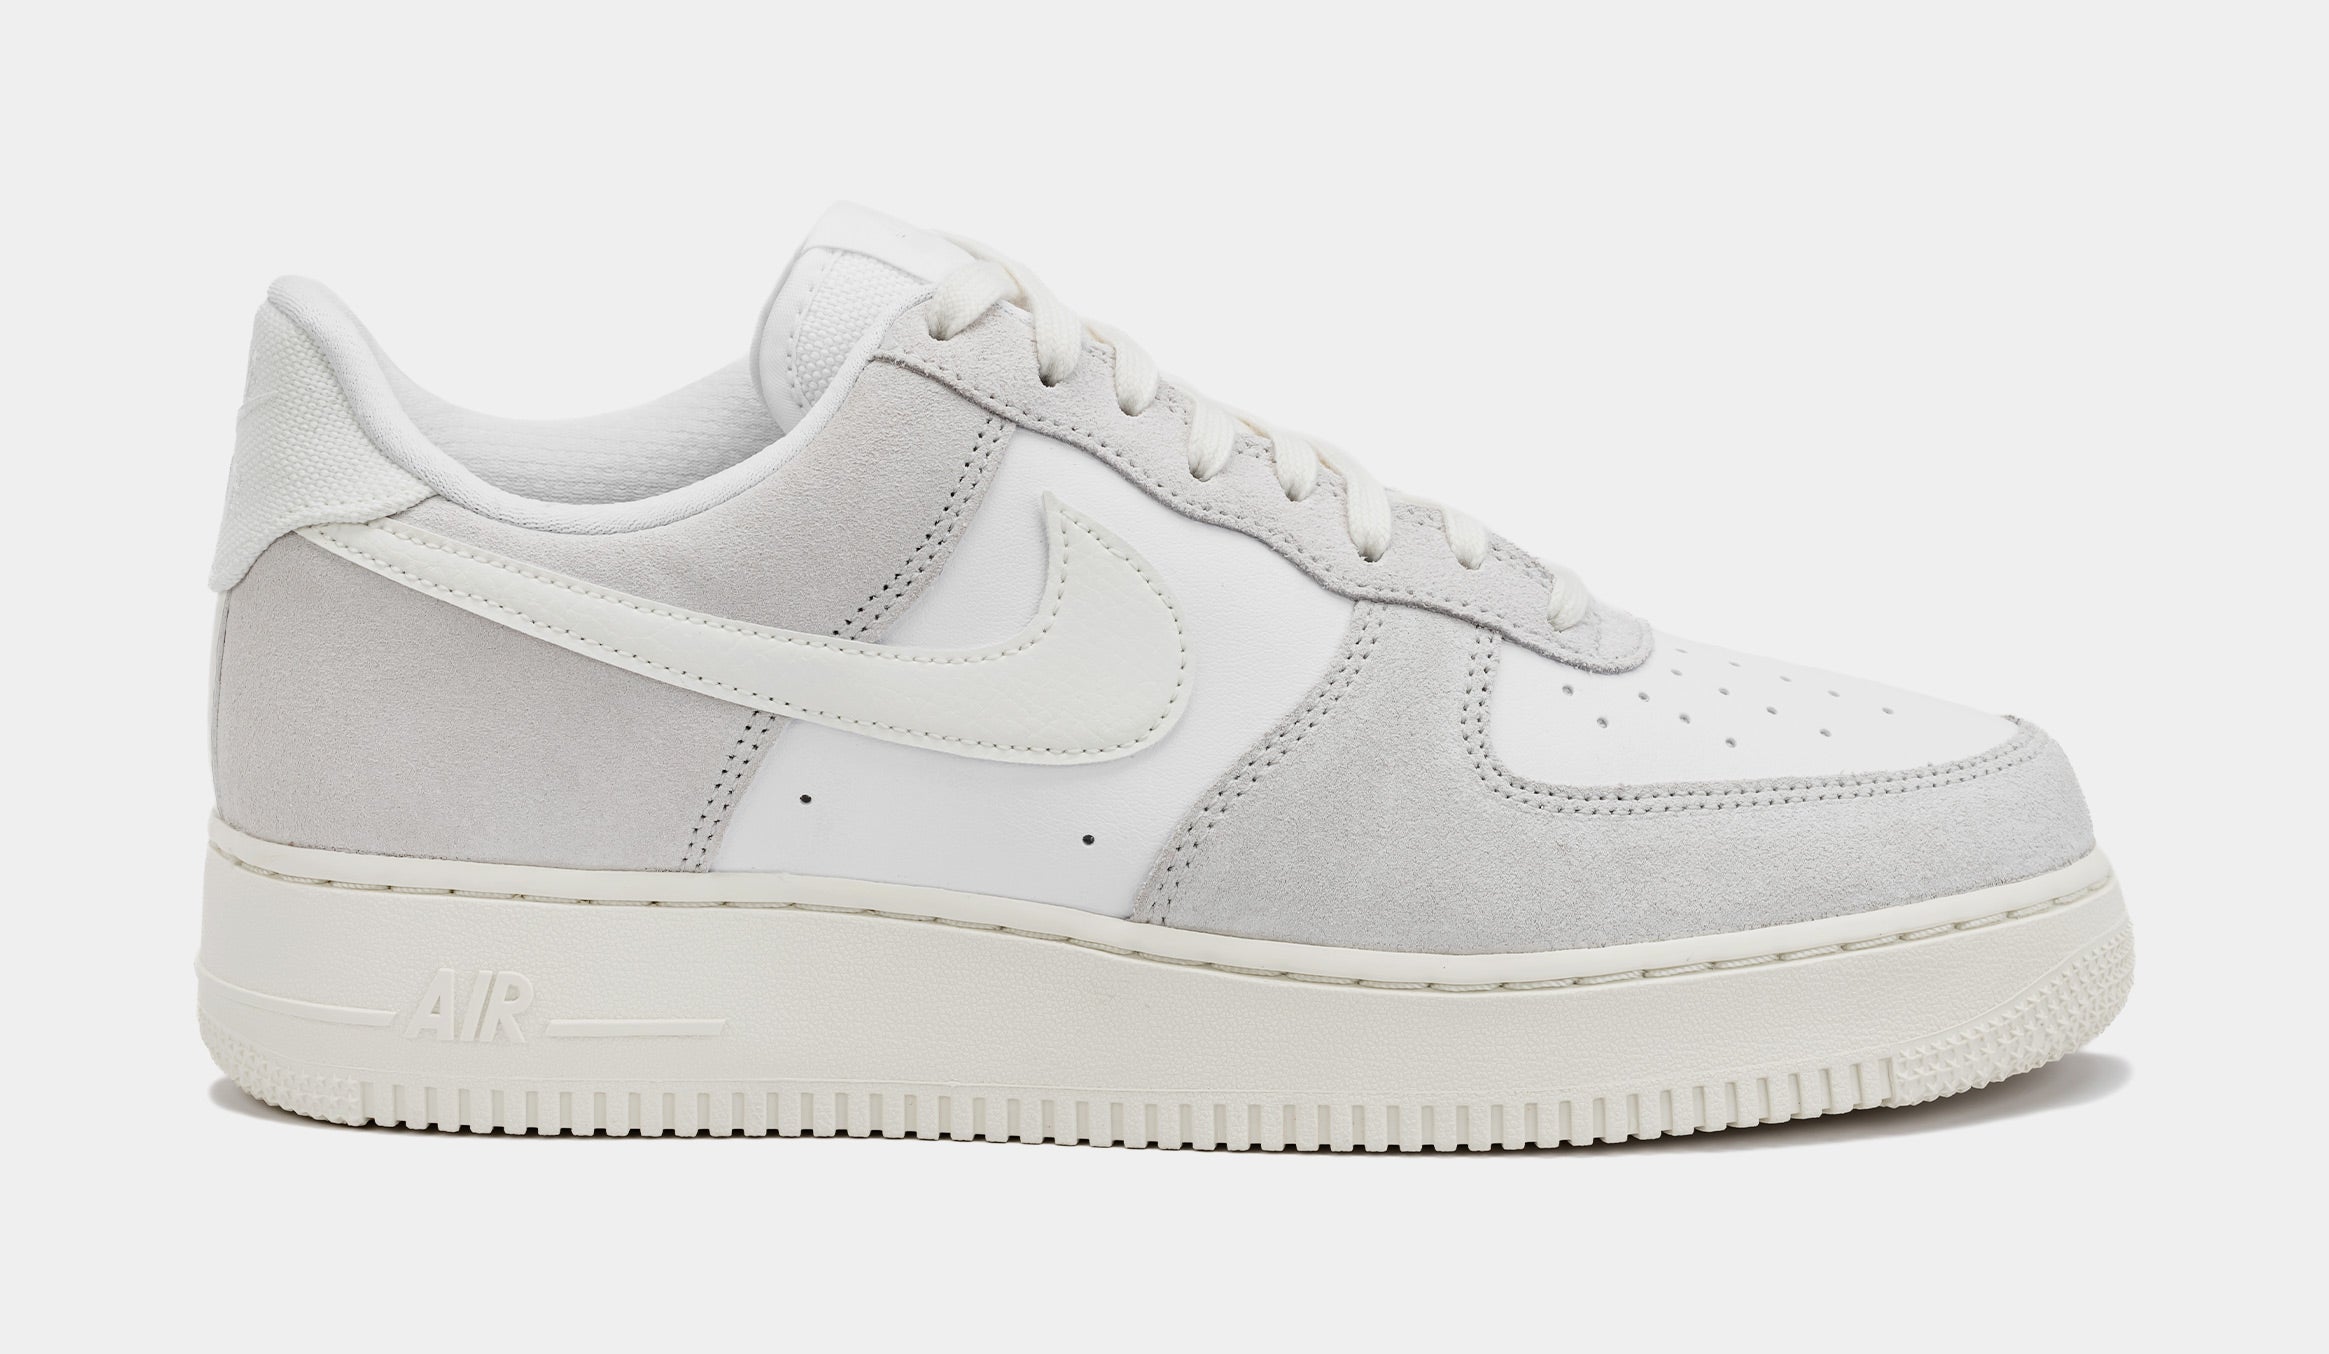 Where to buy Nike Air Force 1 Low “Cream/Plaid” shoes? Price and more  details explored.